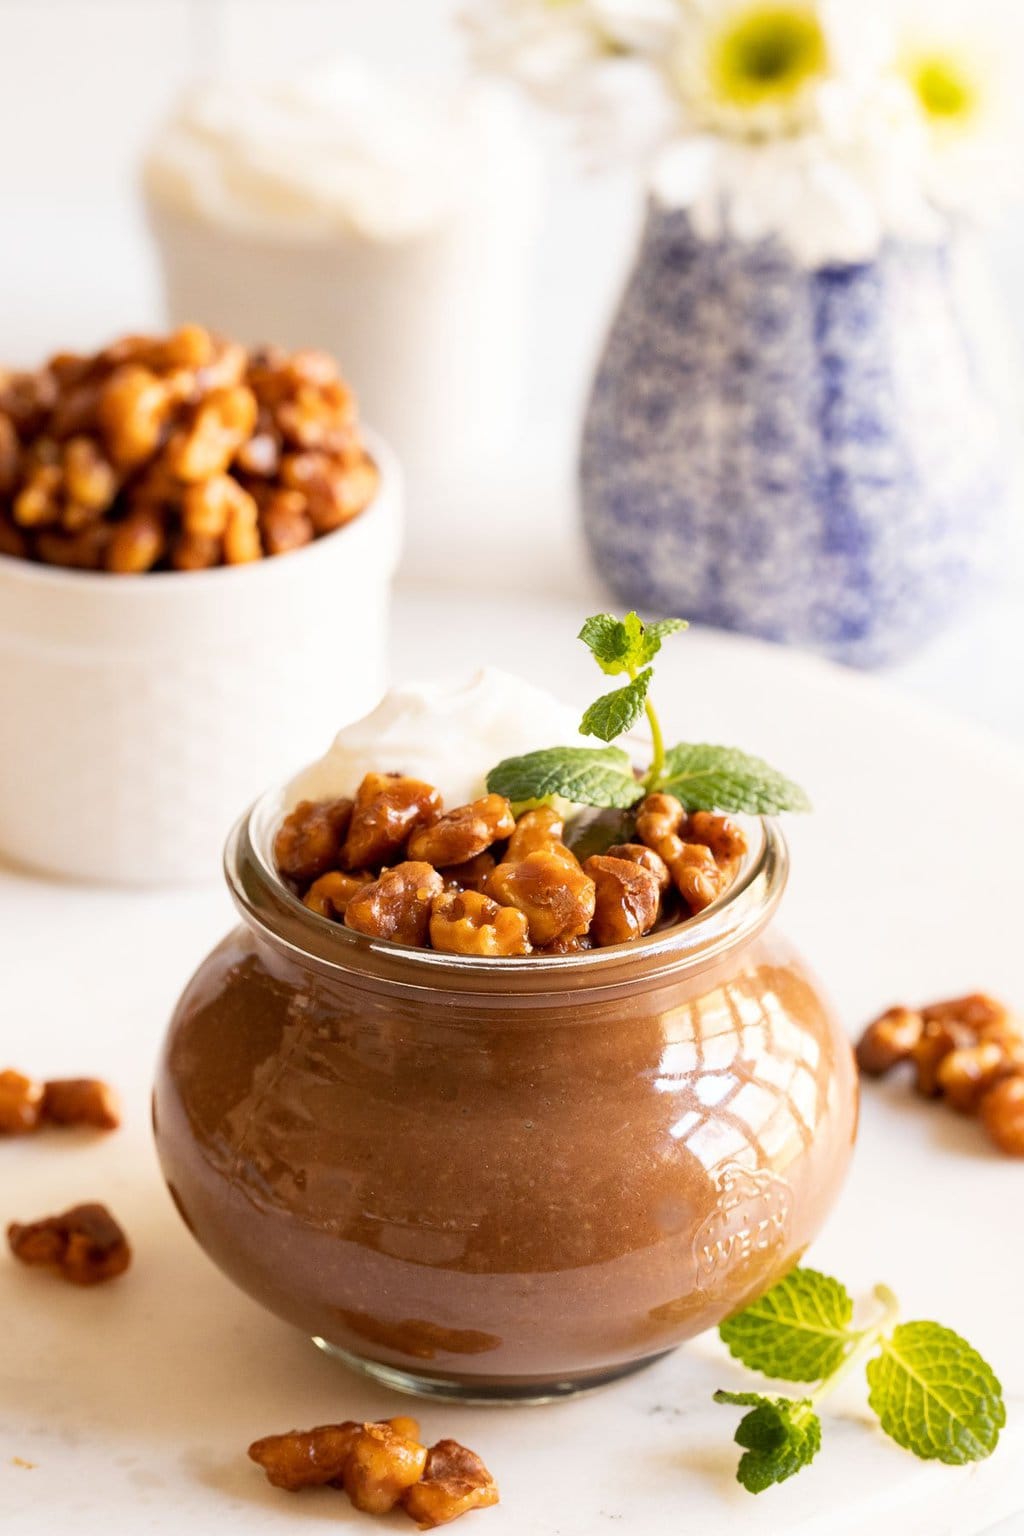 Vertical photo of Chocolate Budino with Candied Maple Walnuts in a glass Weck jar.